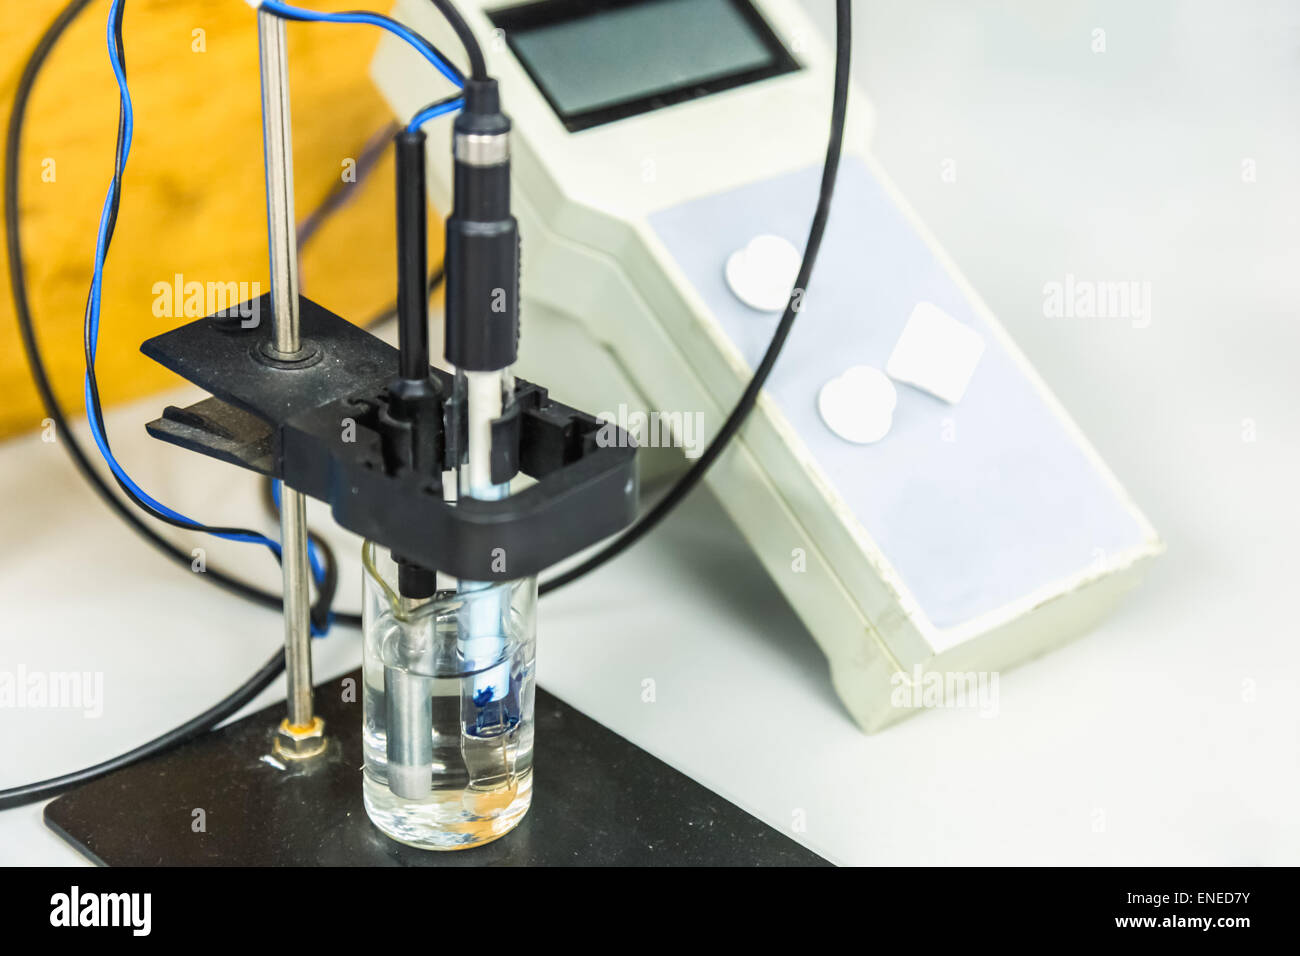 Research laboratory measuring equipment electronic device Stock Photo